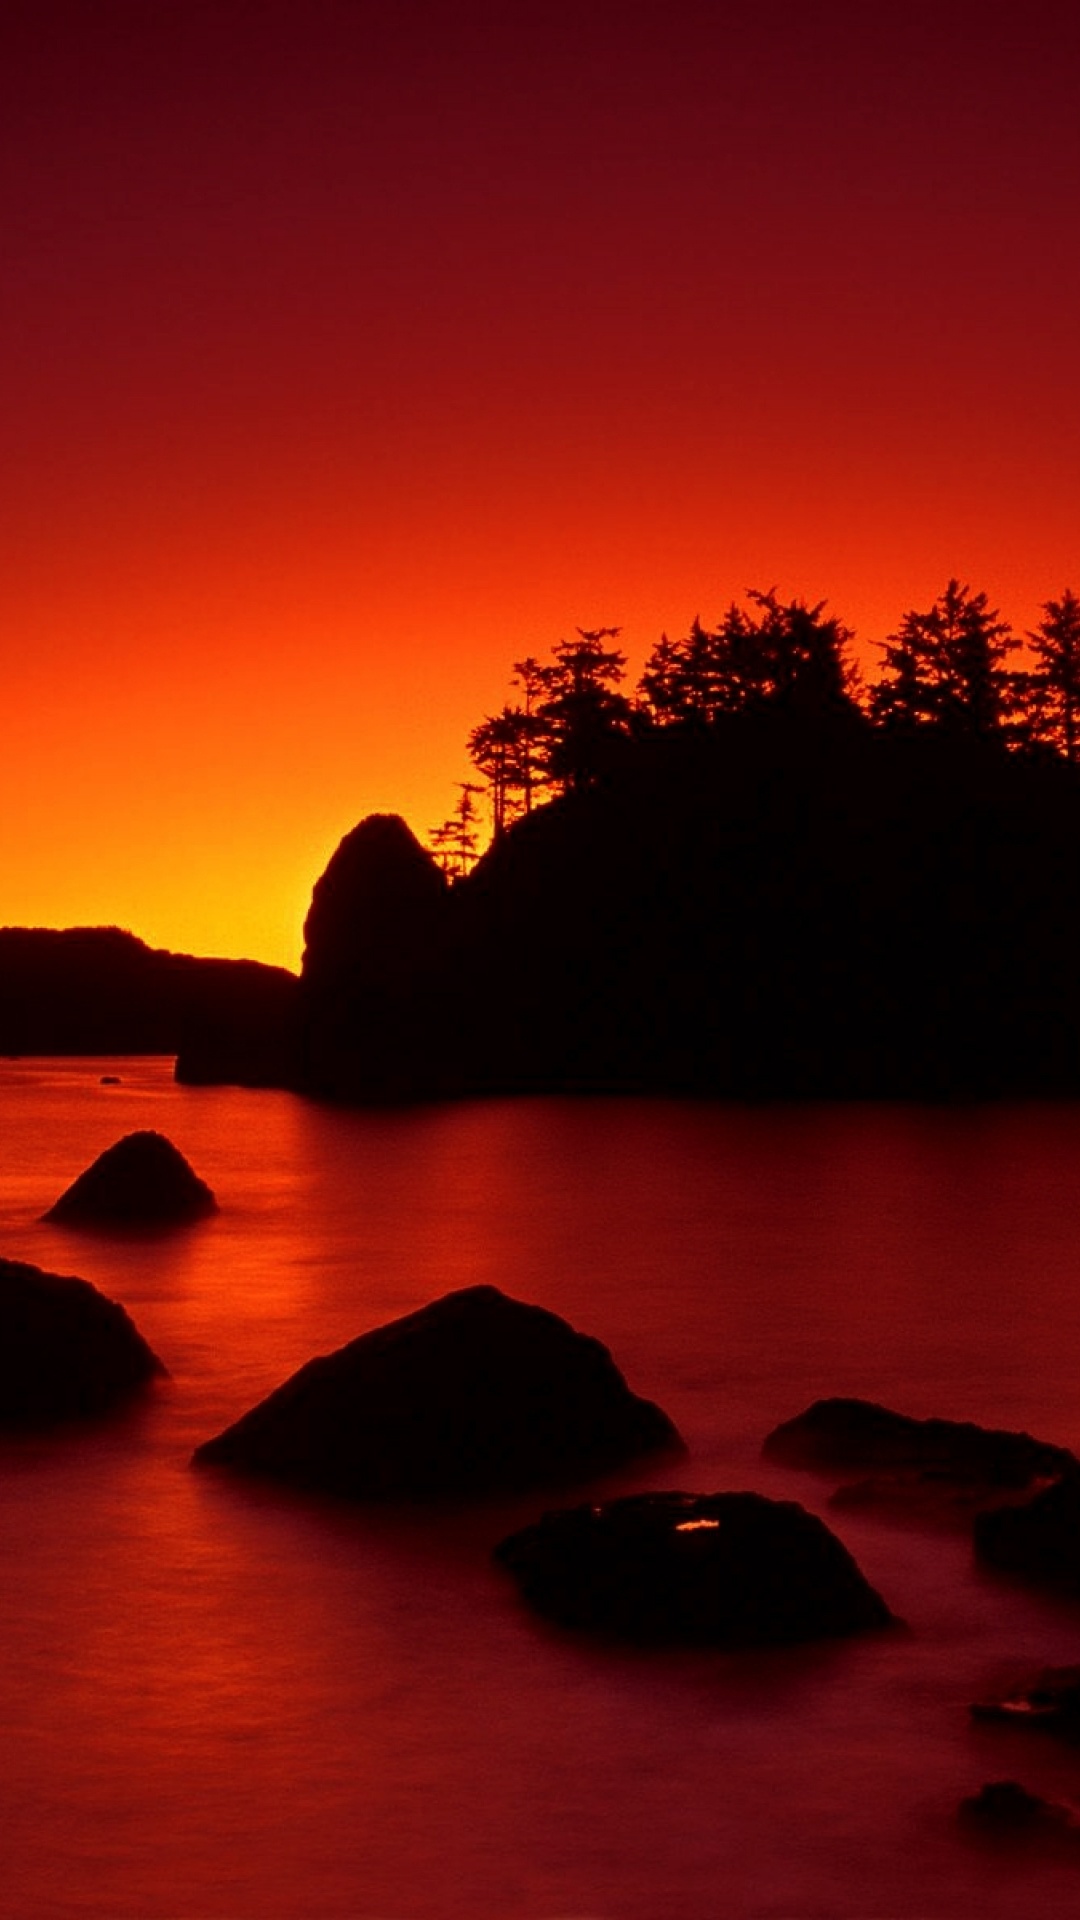 best red wallpapers,sky,natural landscape,nature,red,red sky at morning